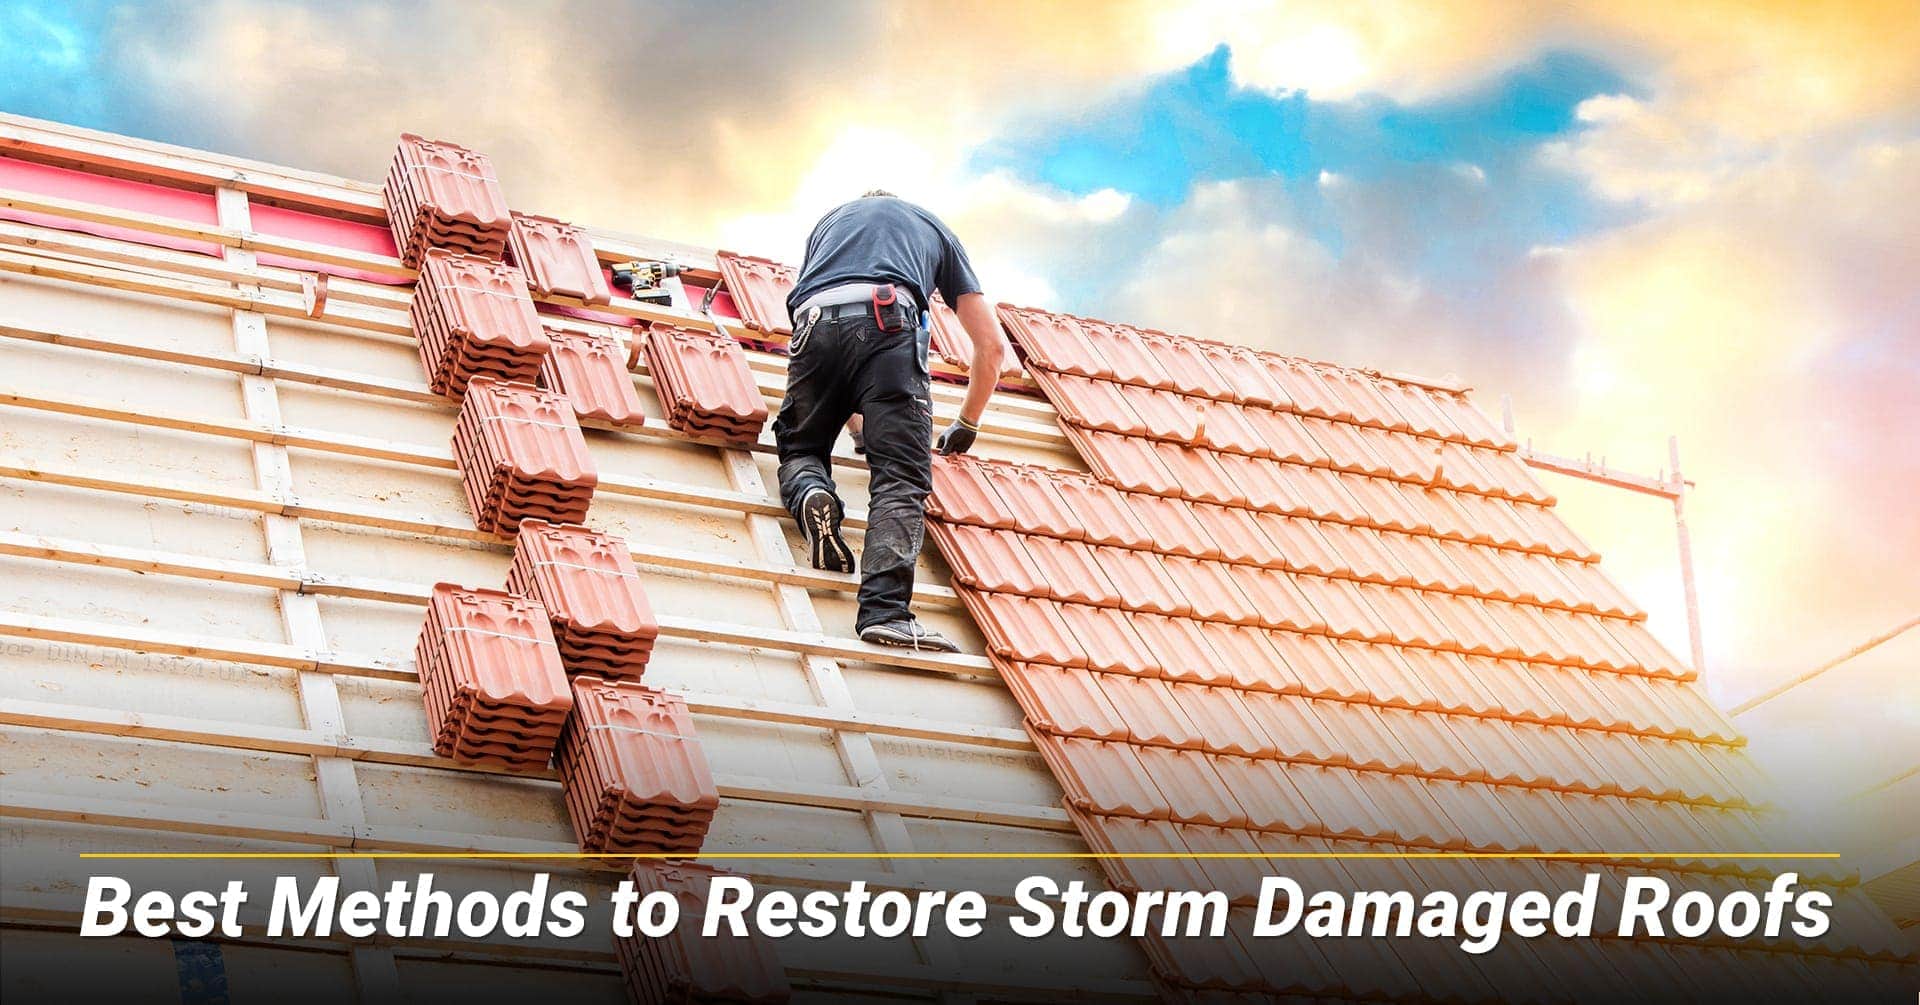 Best Methods to Restore Storm Damaged Roofs, ways to restore damaged roof